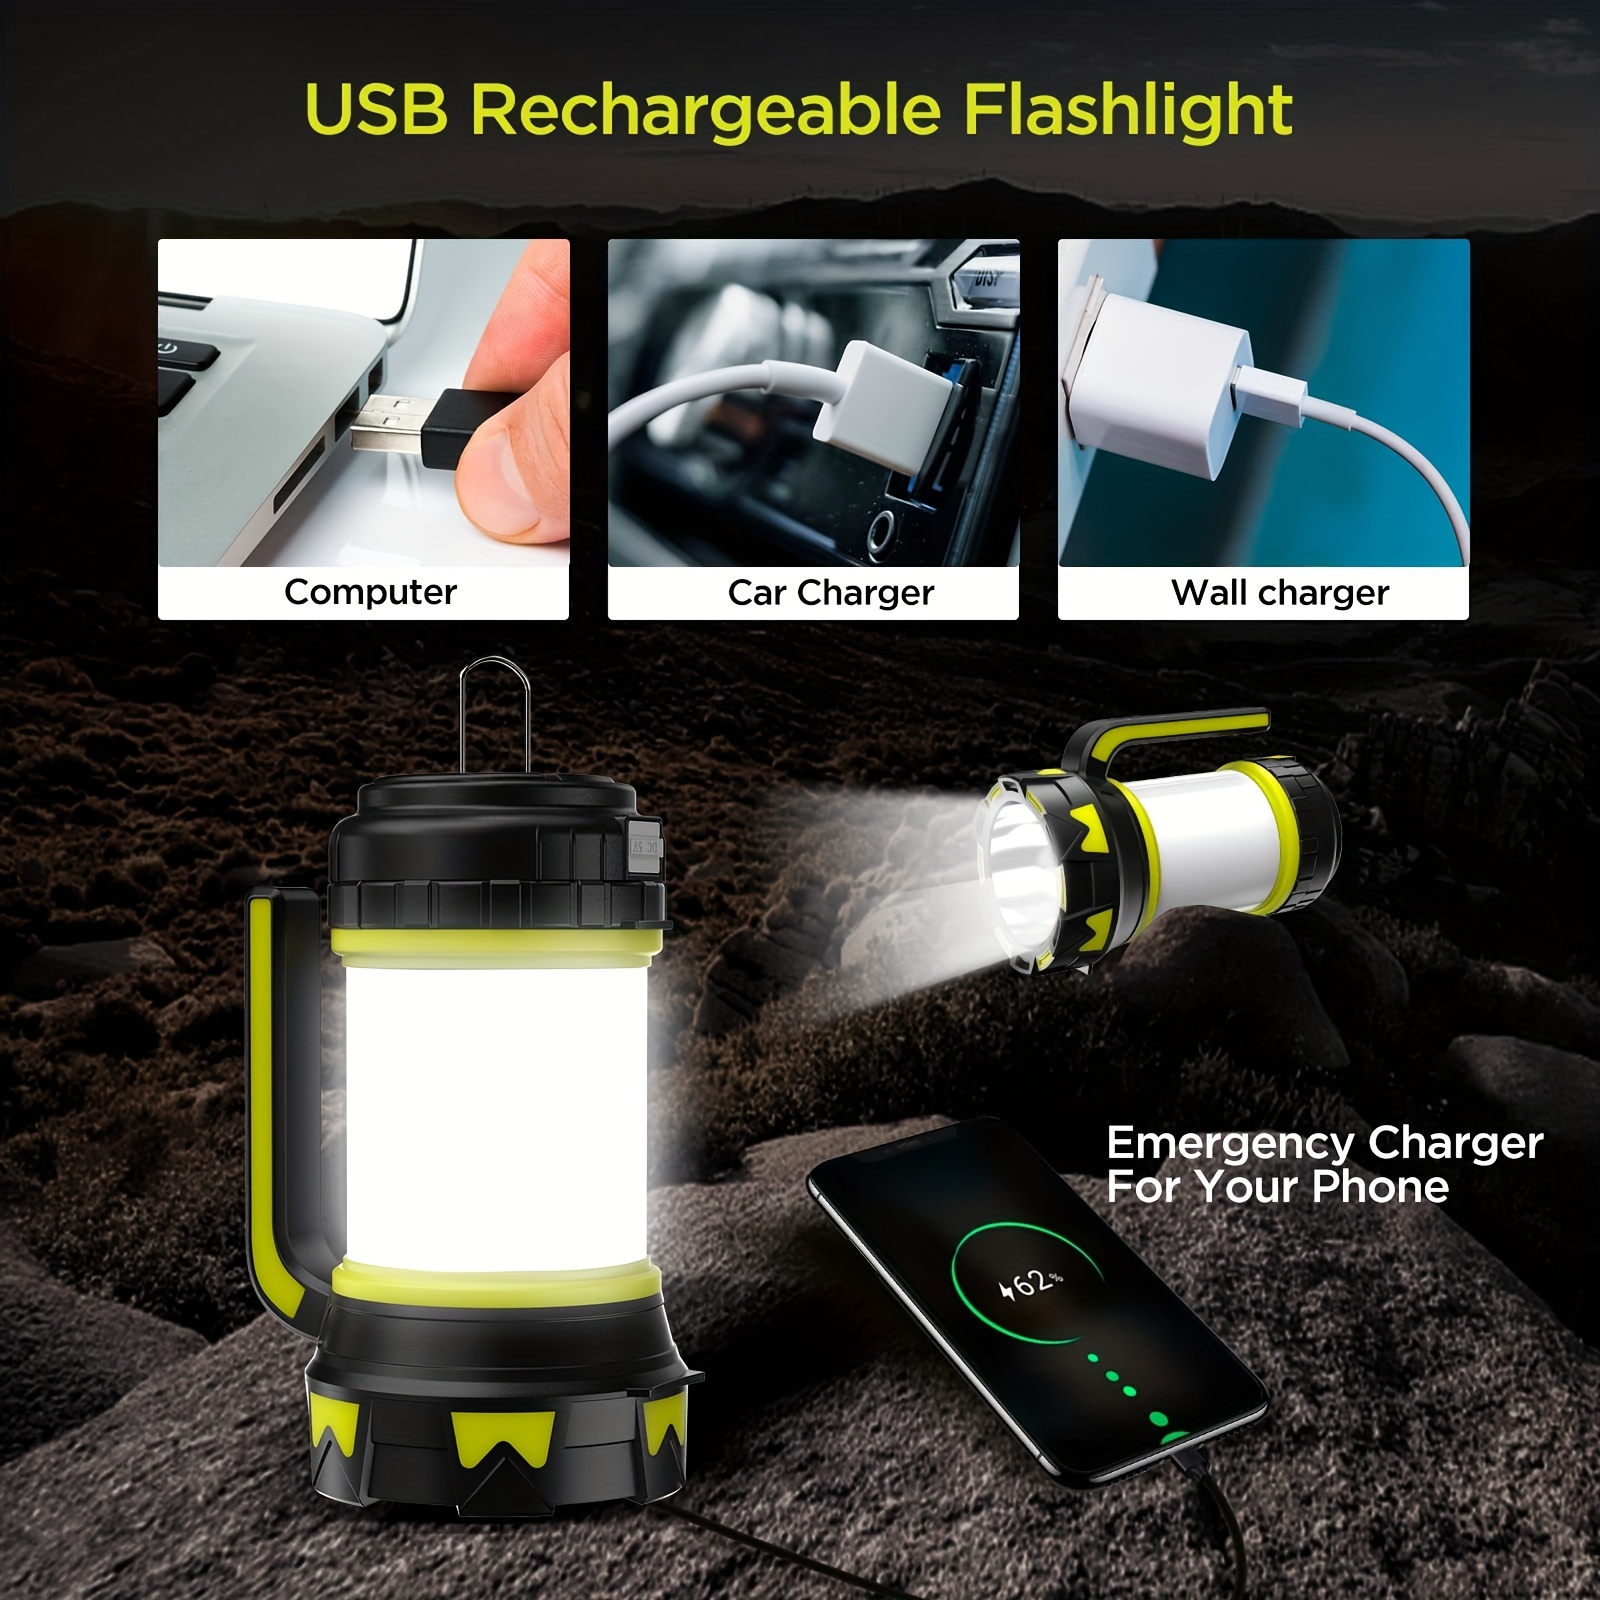 Rechargeable Camping Lantern | Portal Outdoors